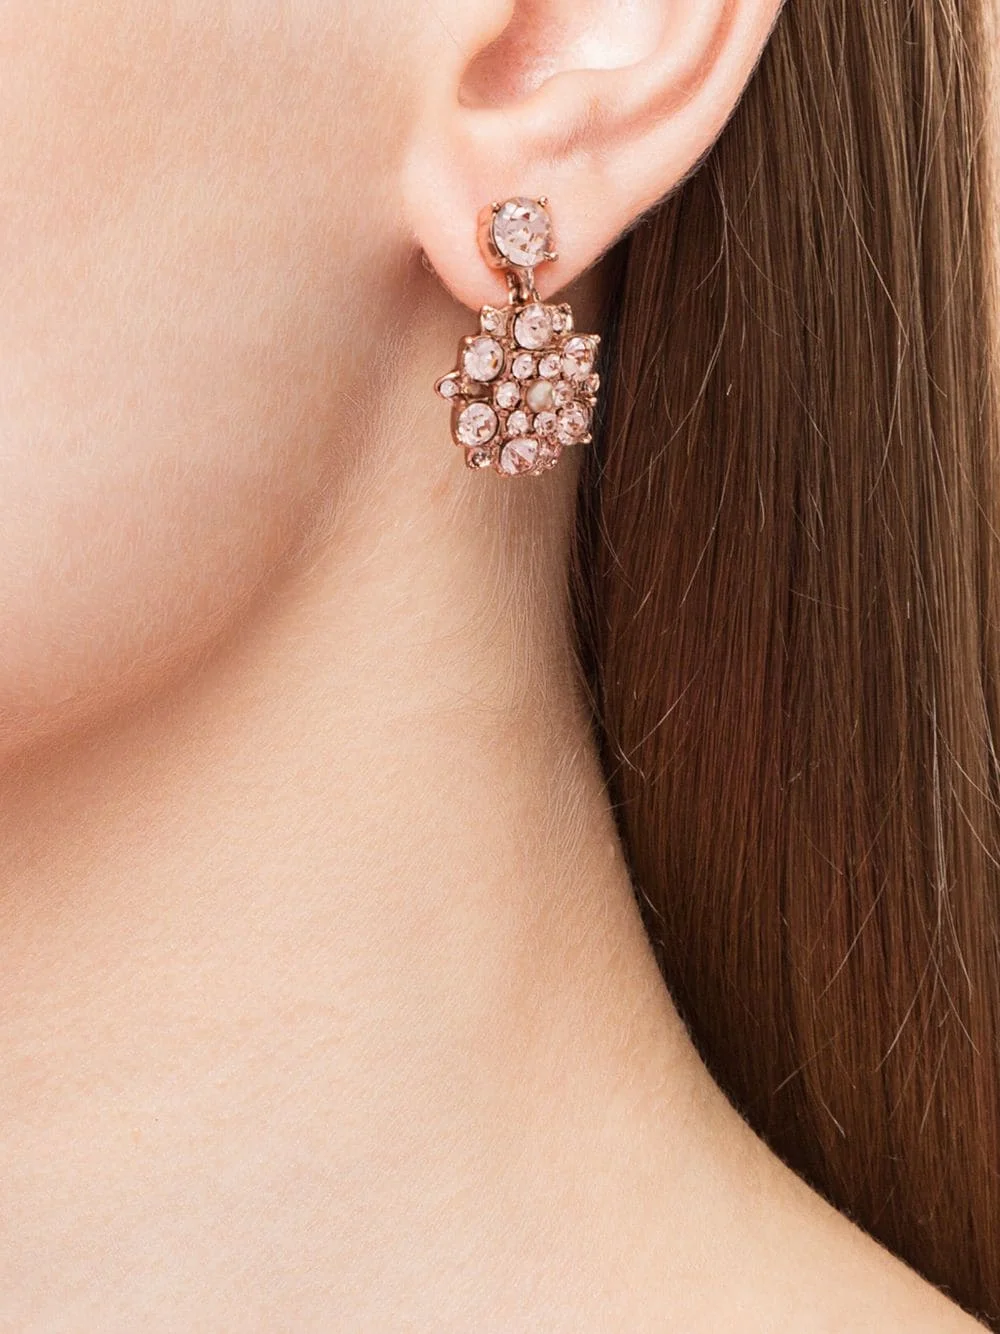 Fashionable and Elegant Pink Crystal Earrings Jewelry